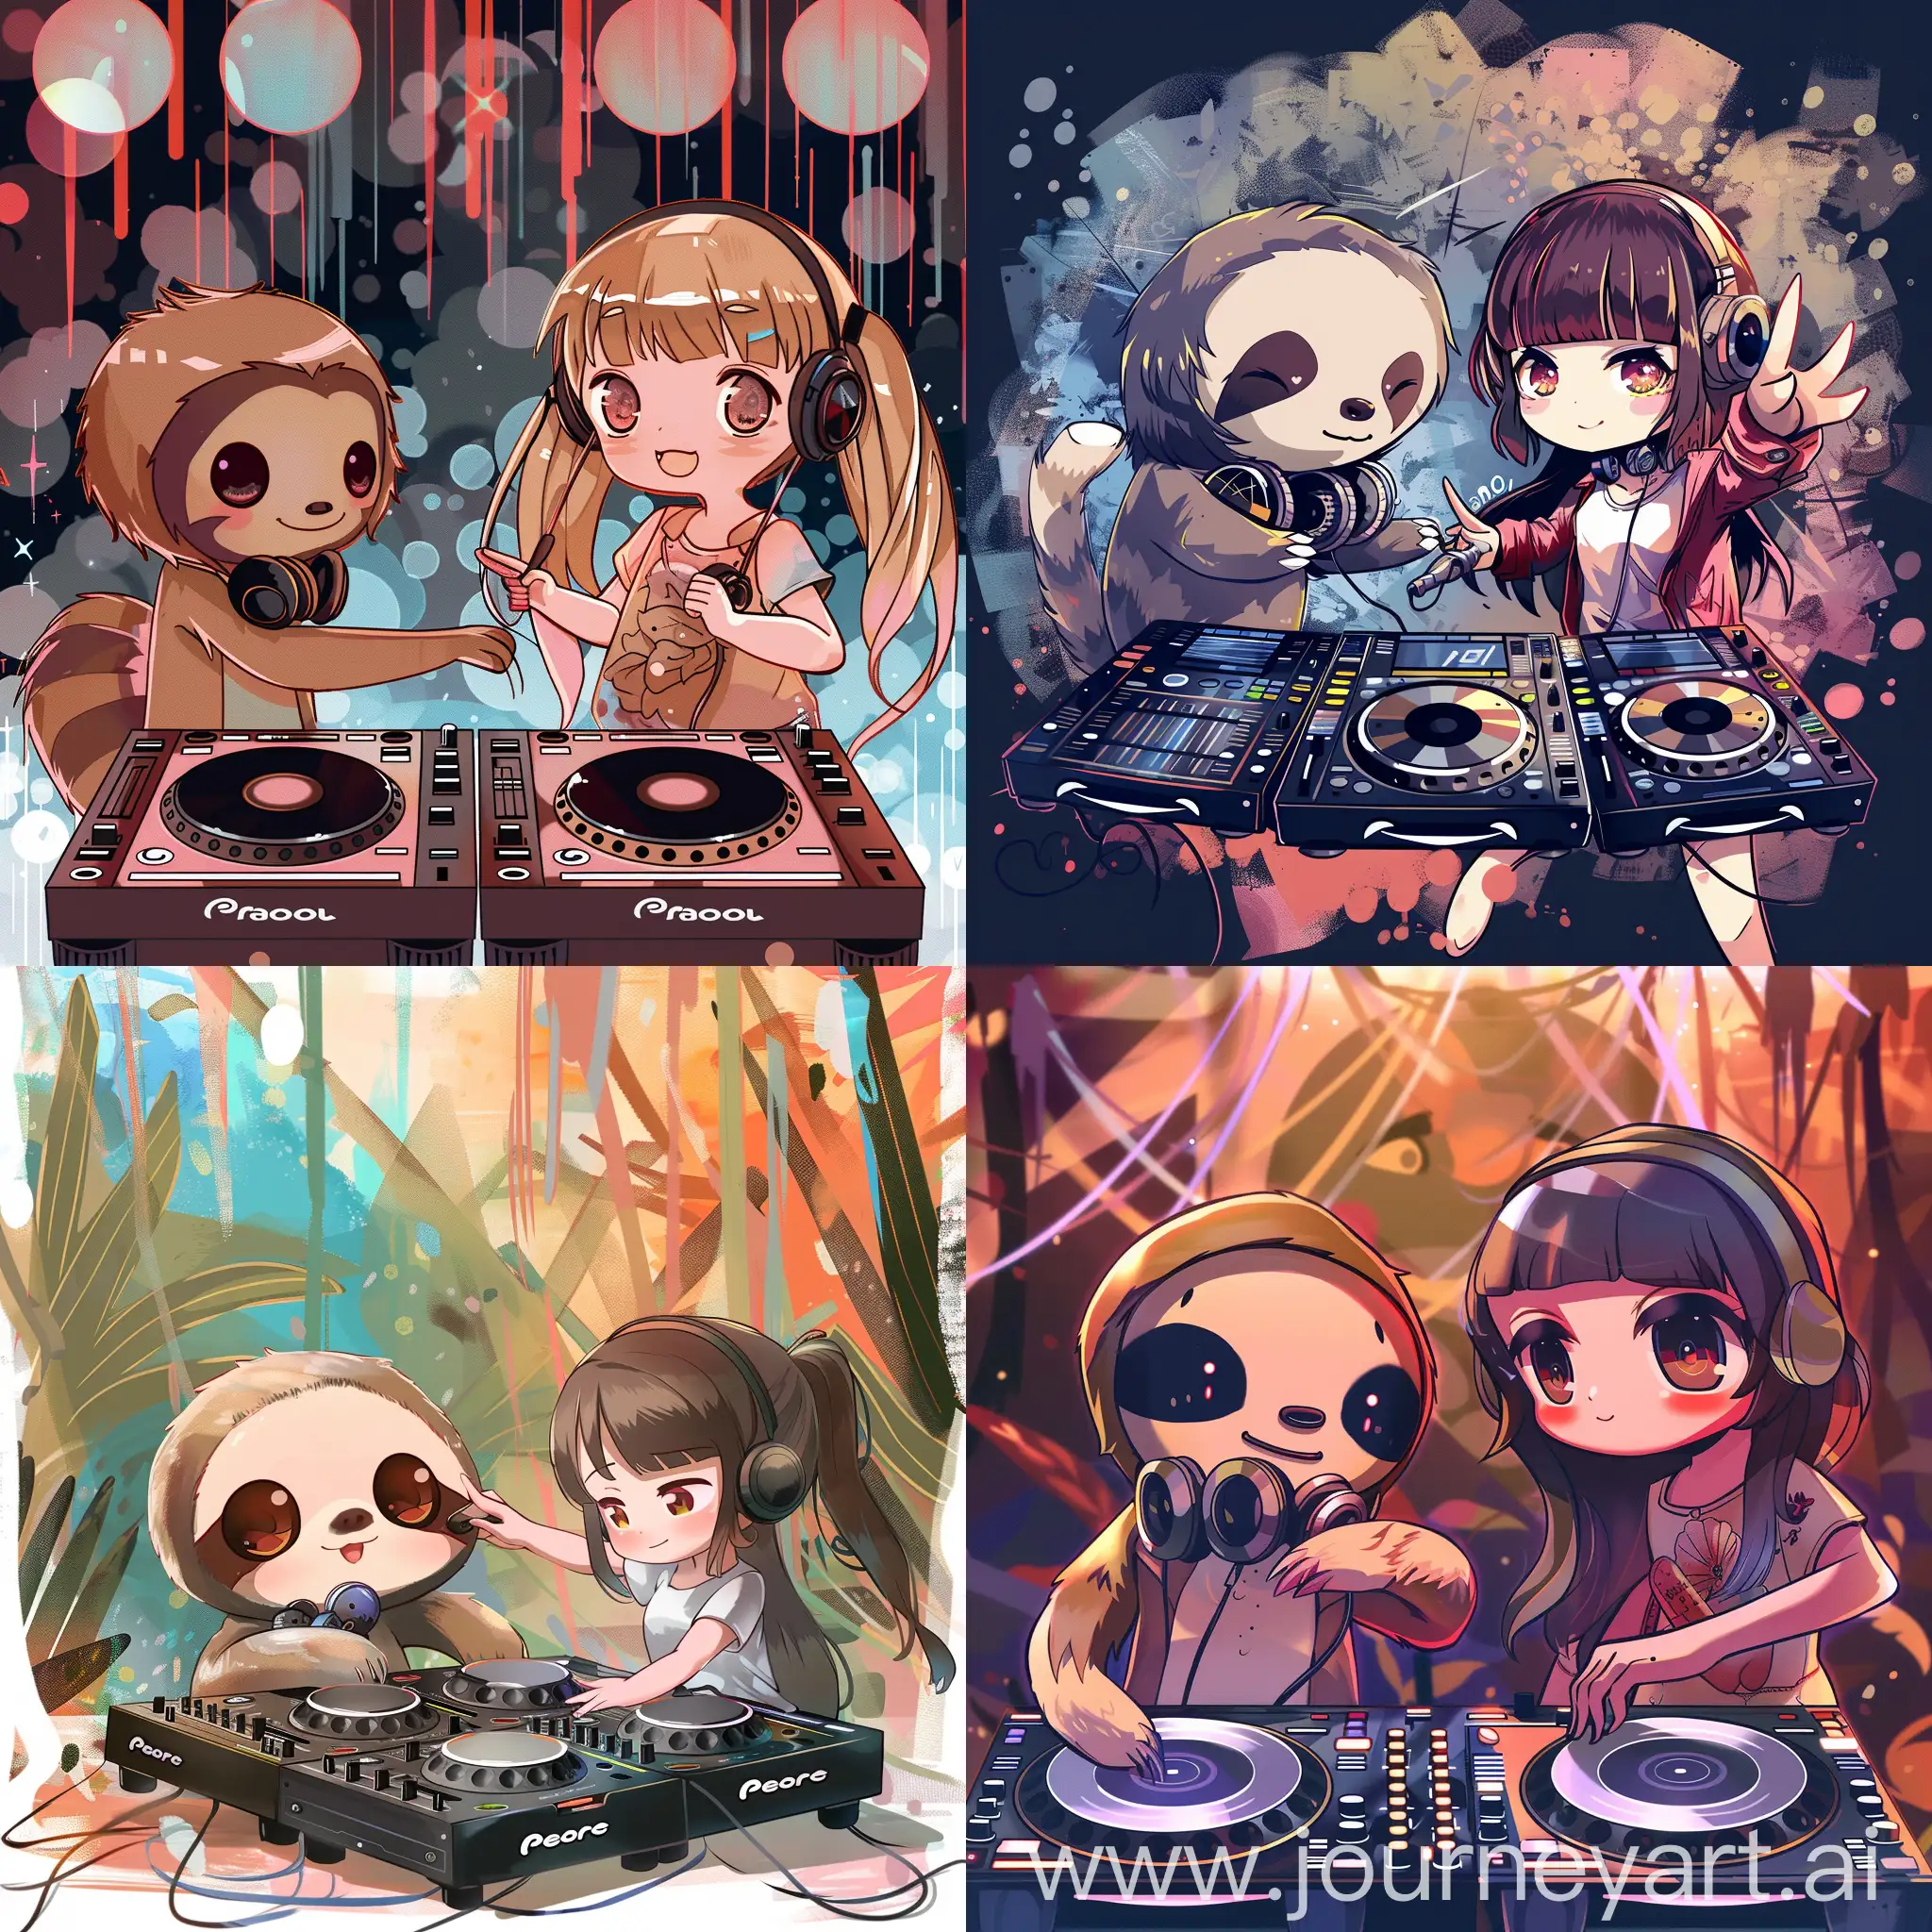 Chibi-Sloth-and-Anime-Girl-DJ-Playful-Duo-in-Abstract-Scene